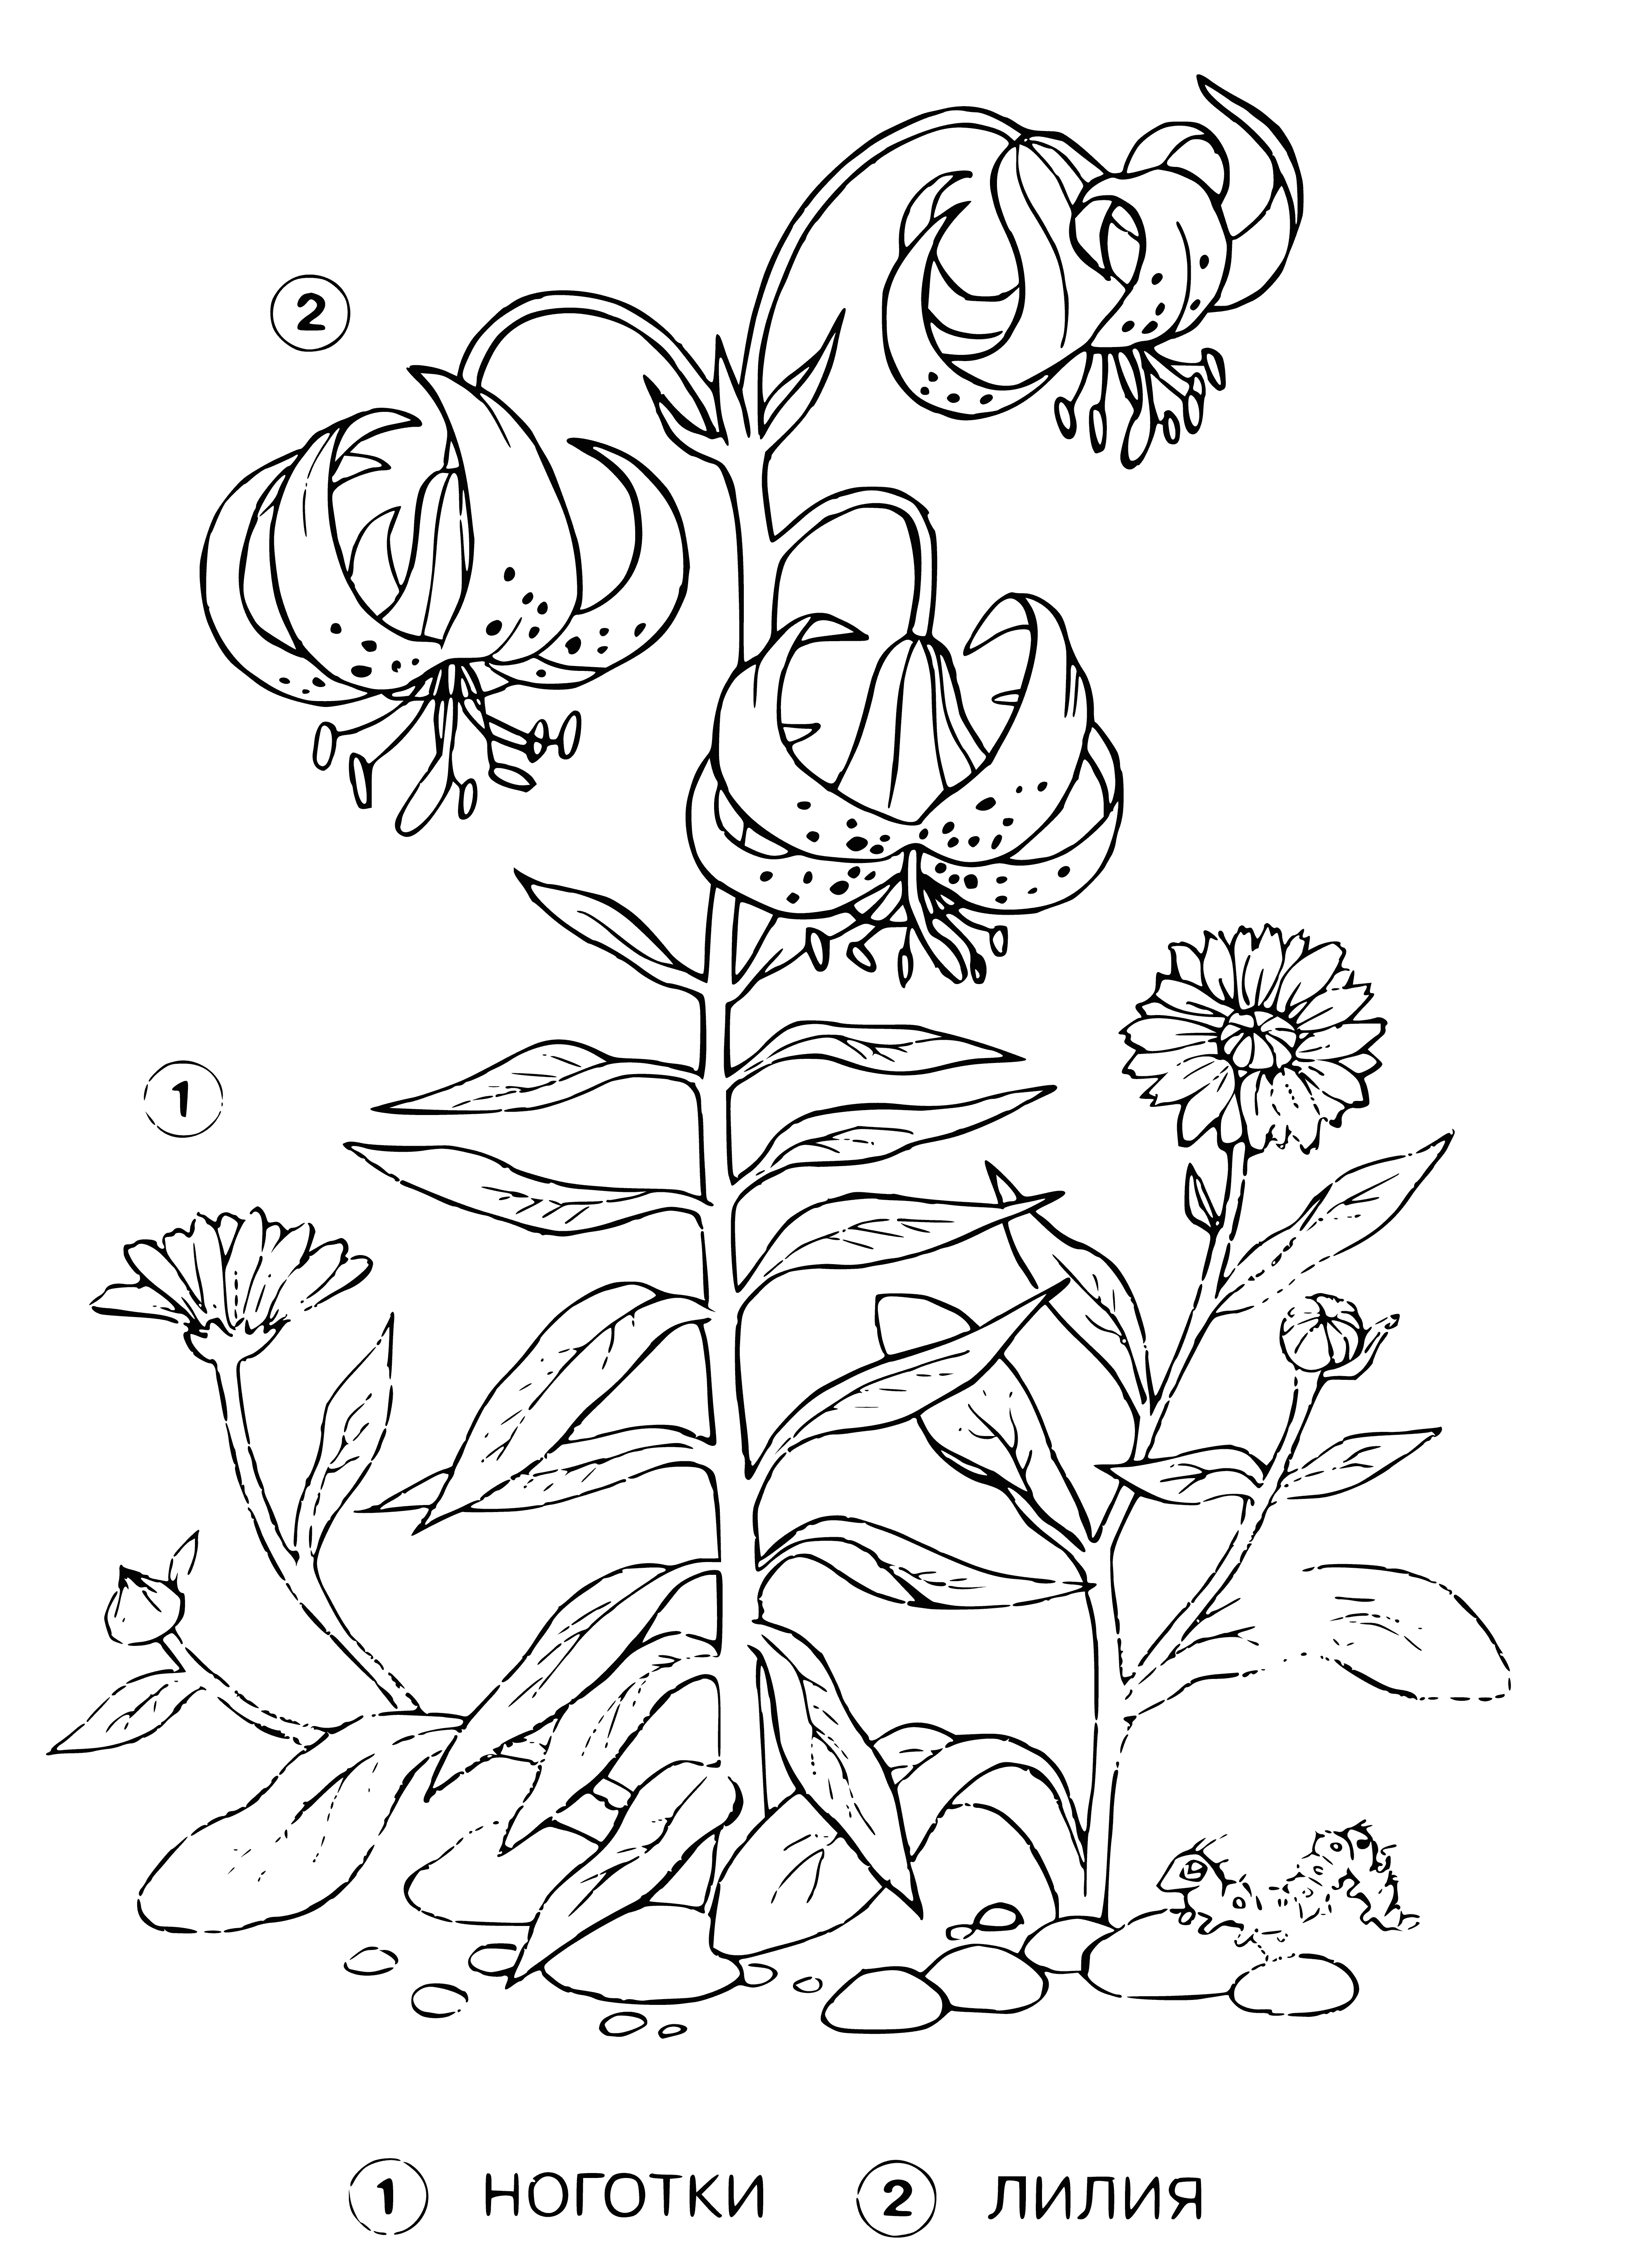 coloring page: Lilies and marigolds are both flowering plants, lilies having long, slender inner-curving petals and marigolds having shorter, round orange/gold petals.